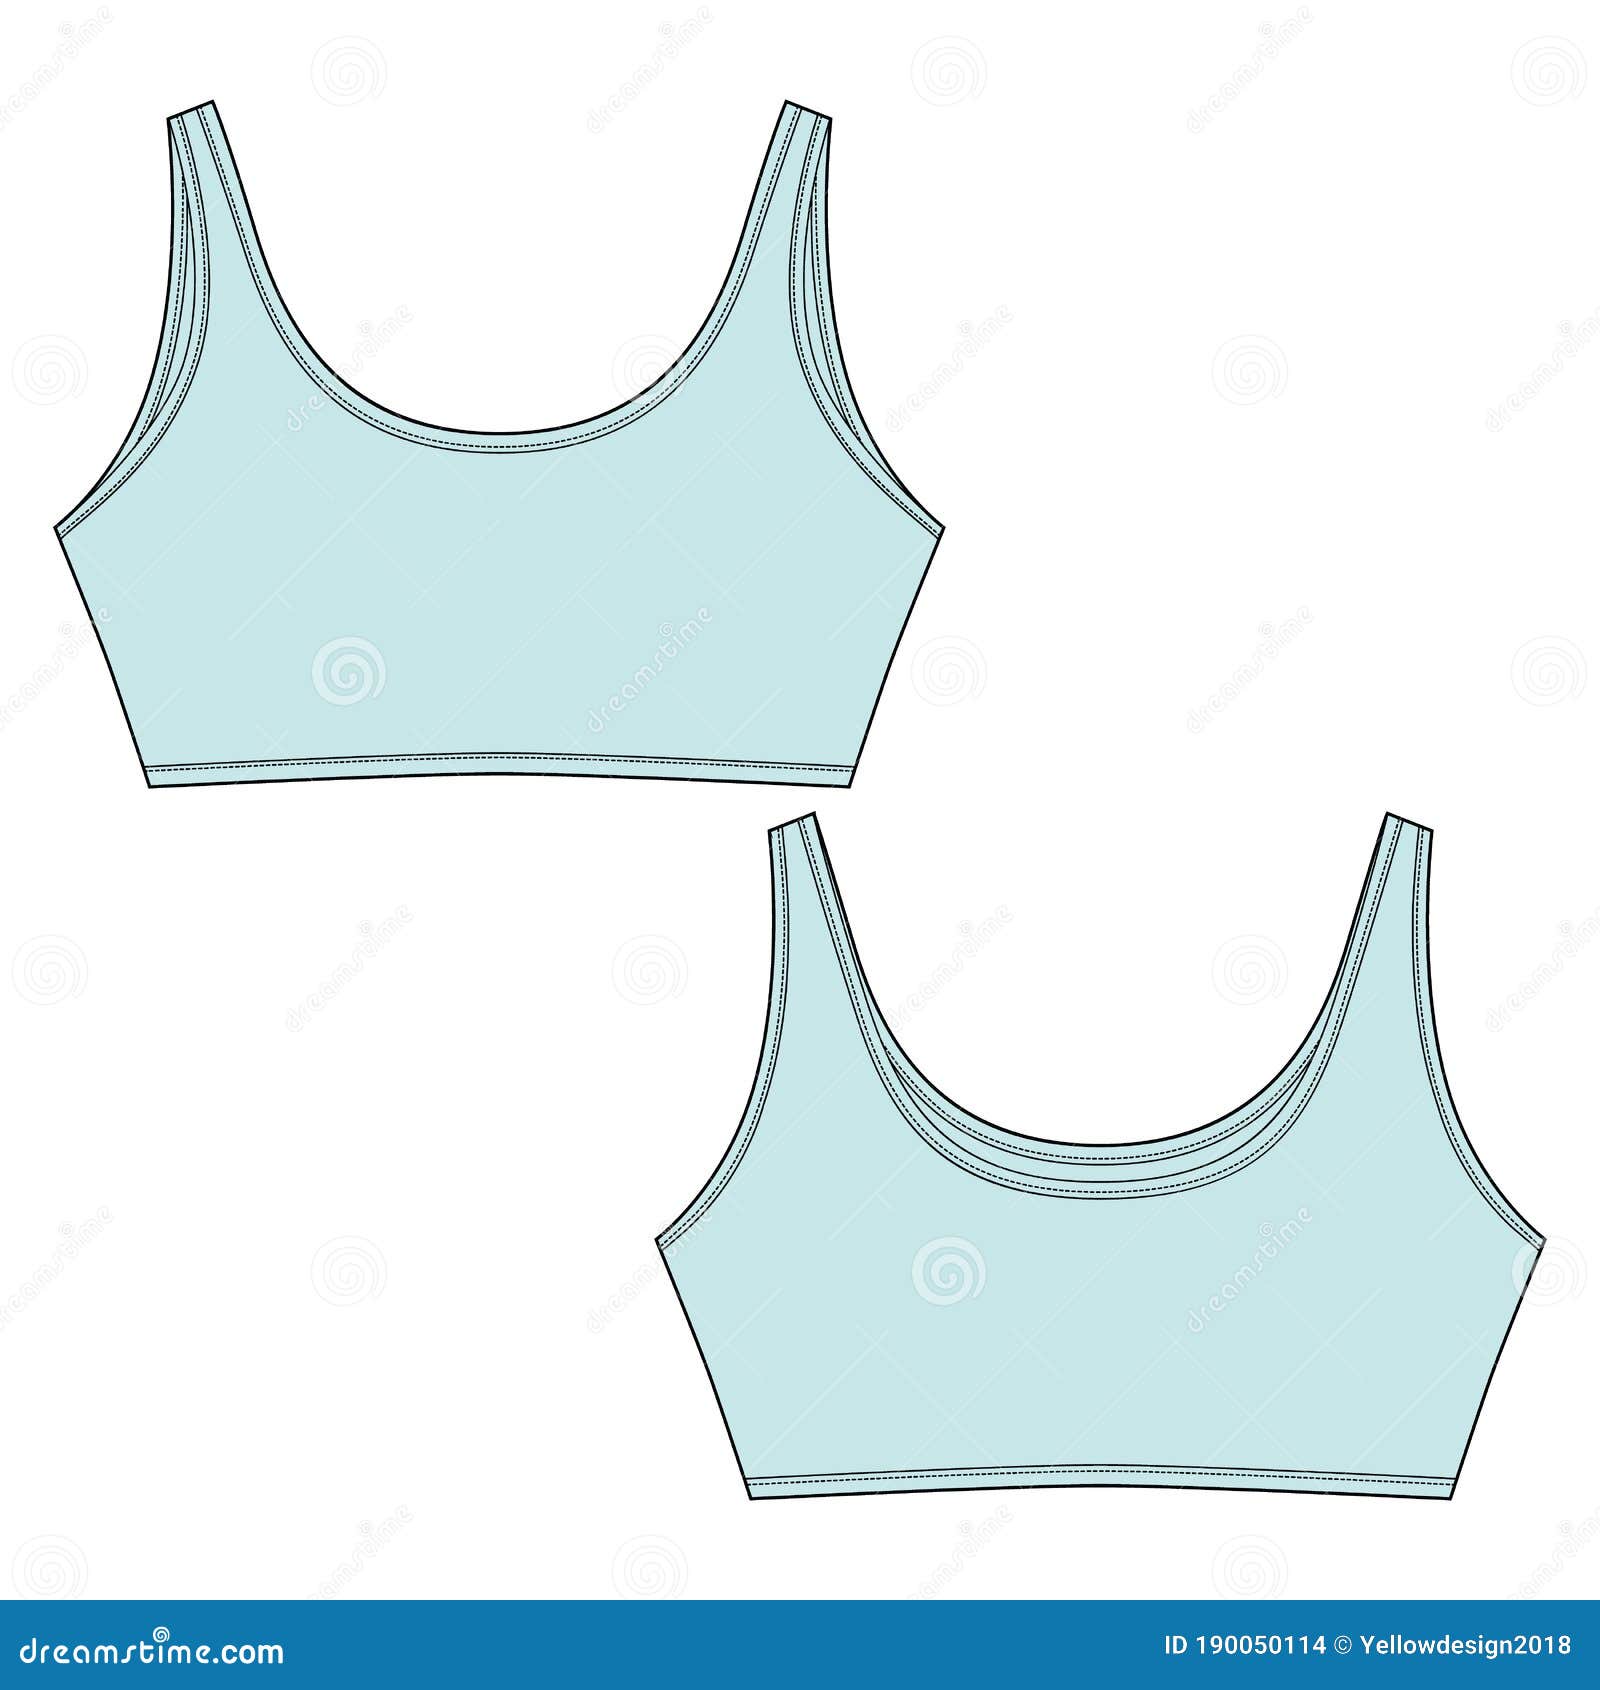 Technical Sketch of Light Blue Color Sport Bra. Casual Clothes for